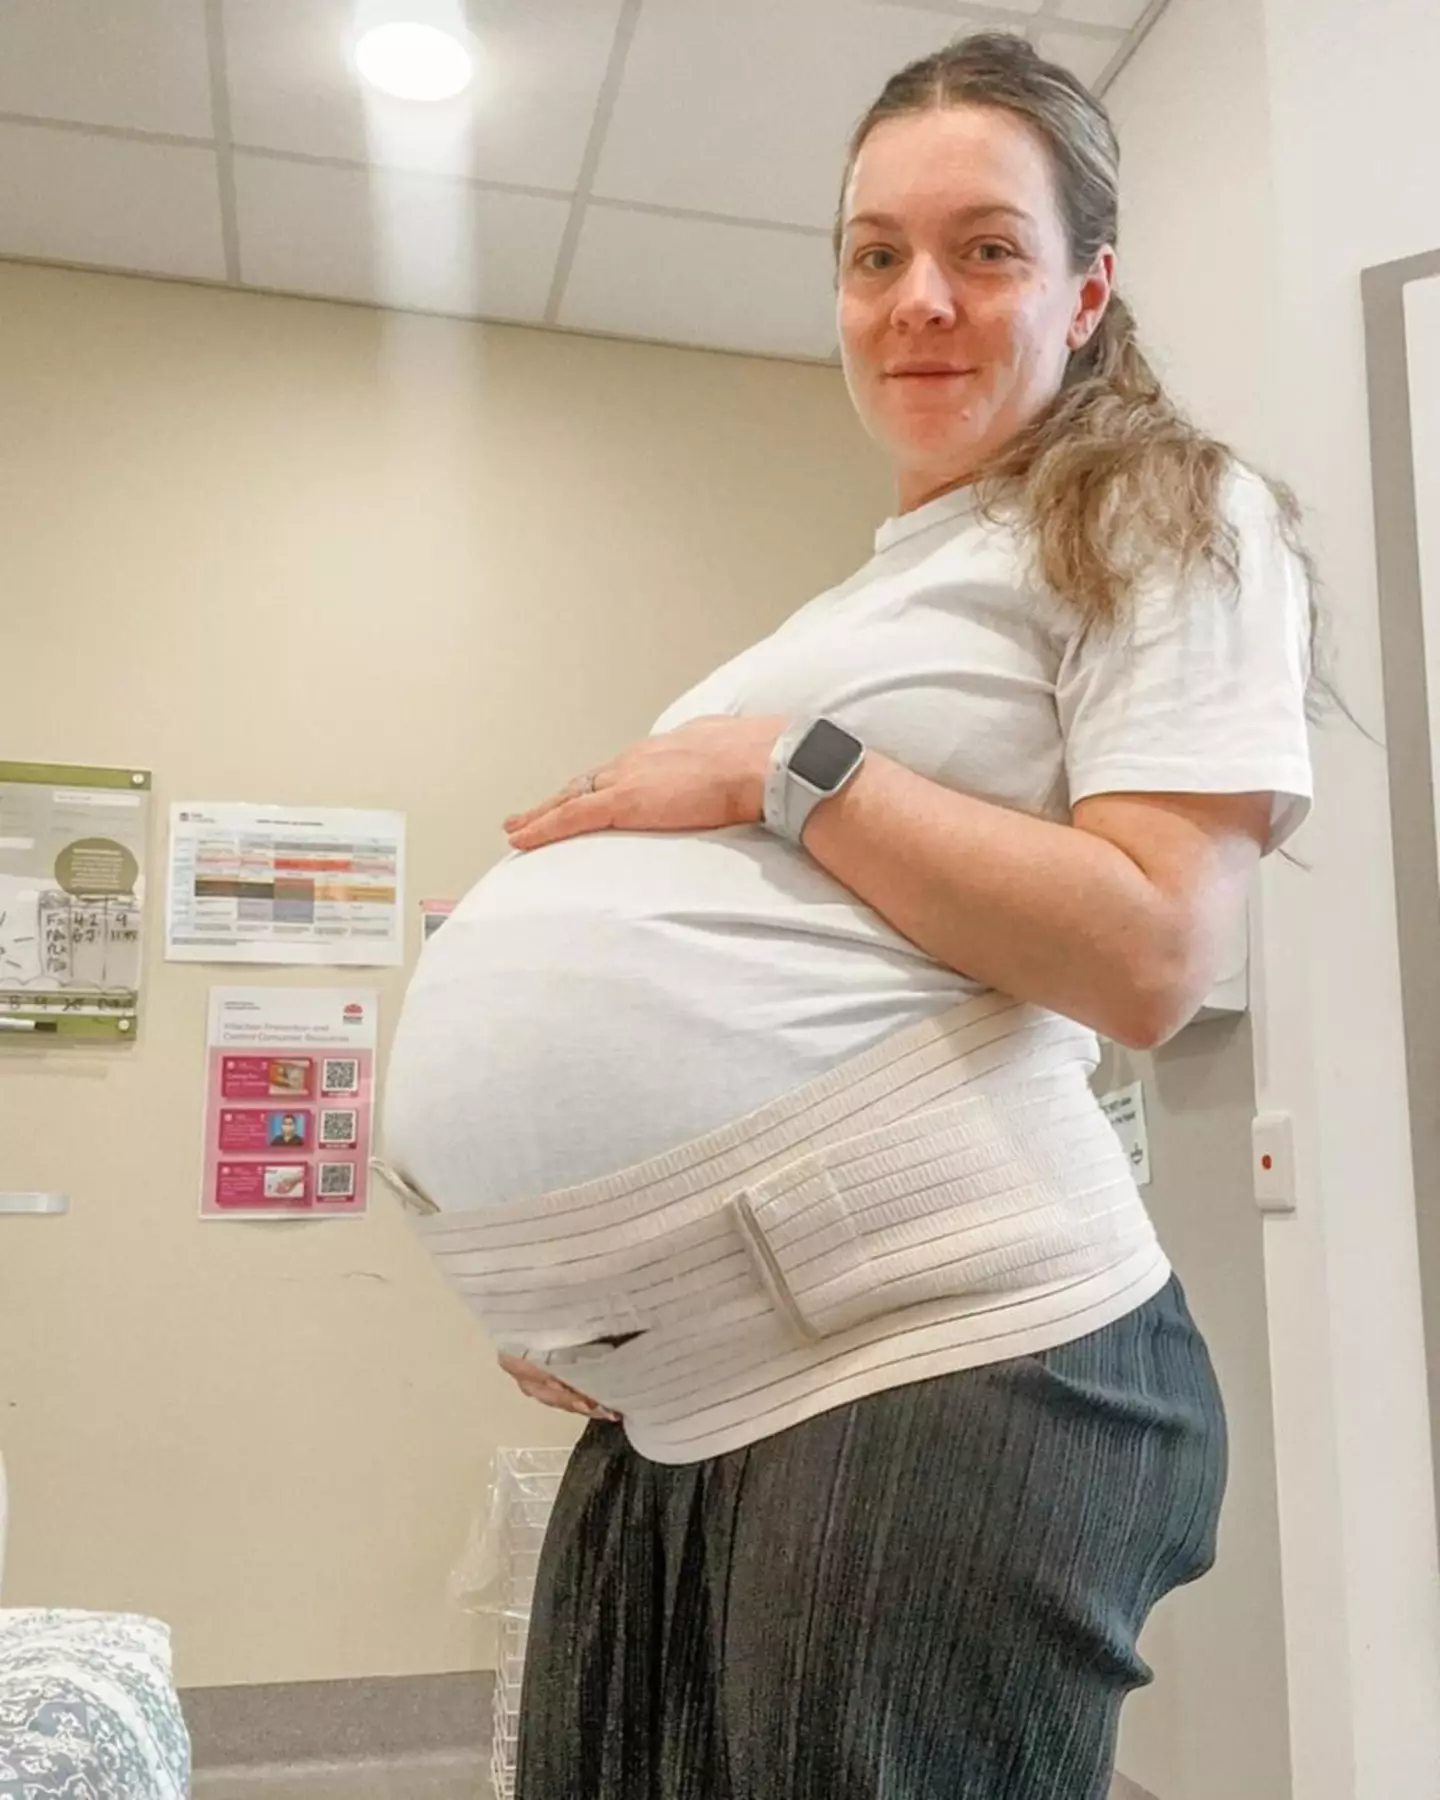 The school teacher became pregnant after starting IVF.